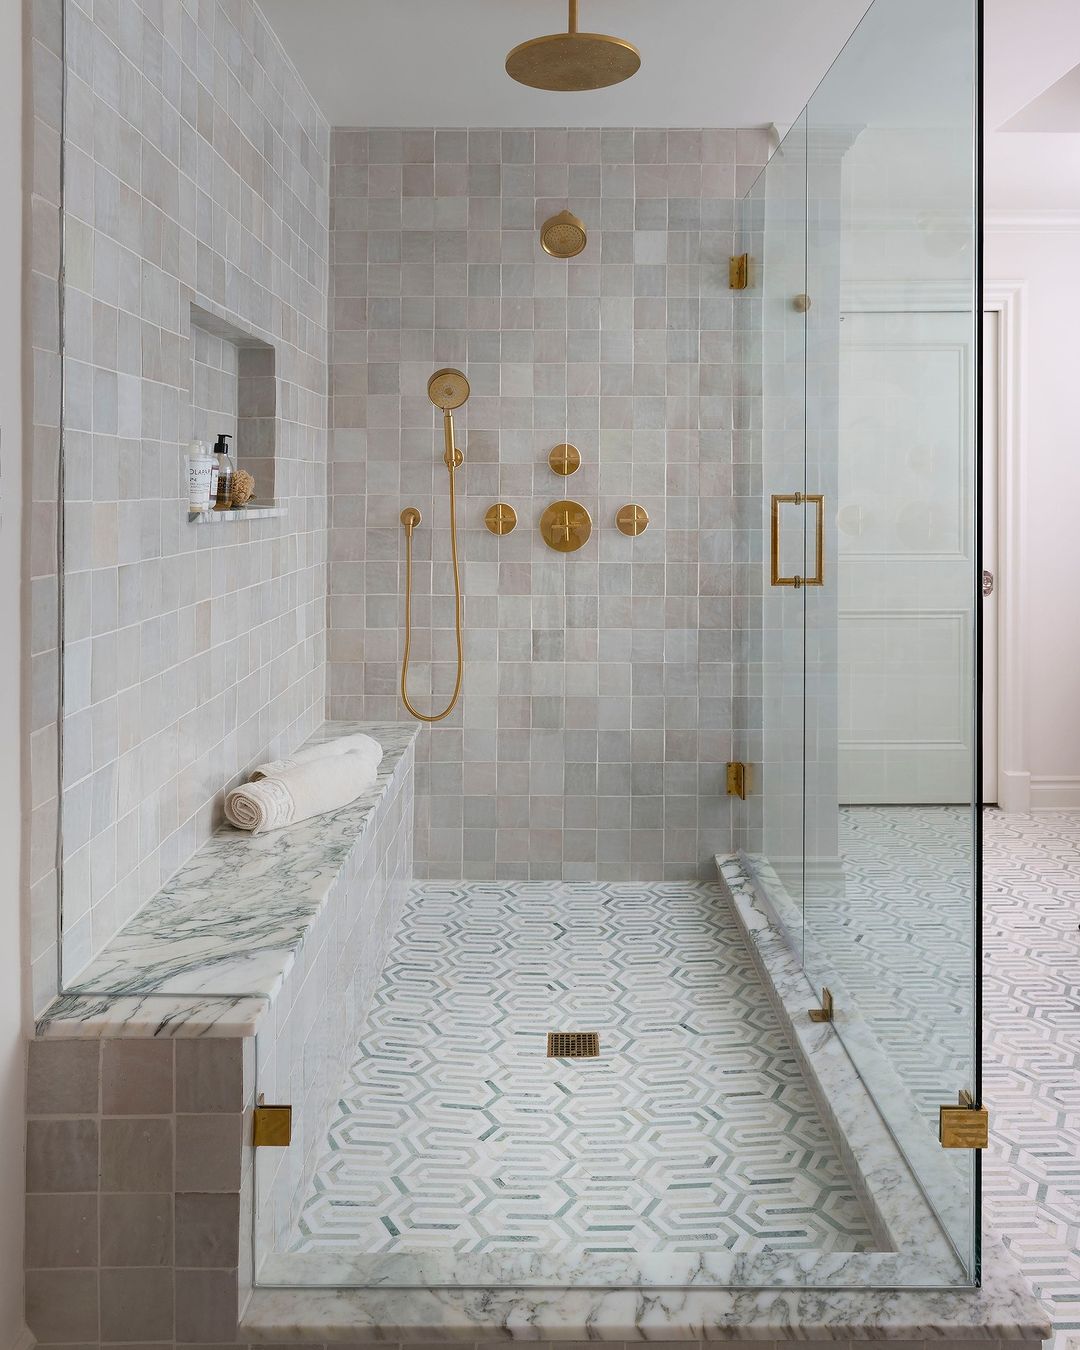 Exquisite Patterned Tile Shower with Marble Bench and Brass Fixtures - Best Shower Niche Ideas